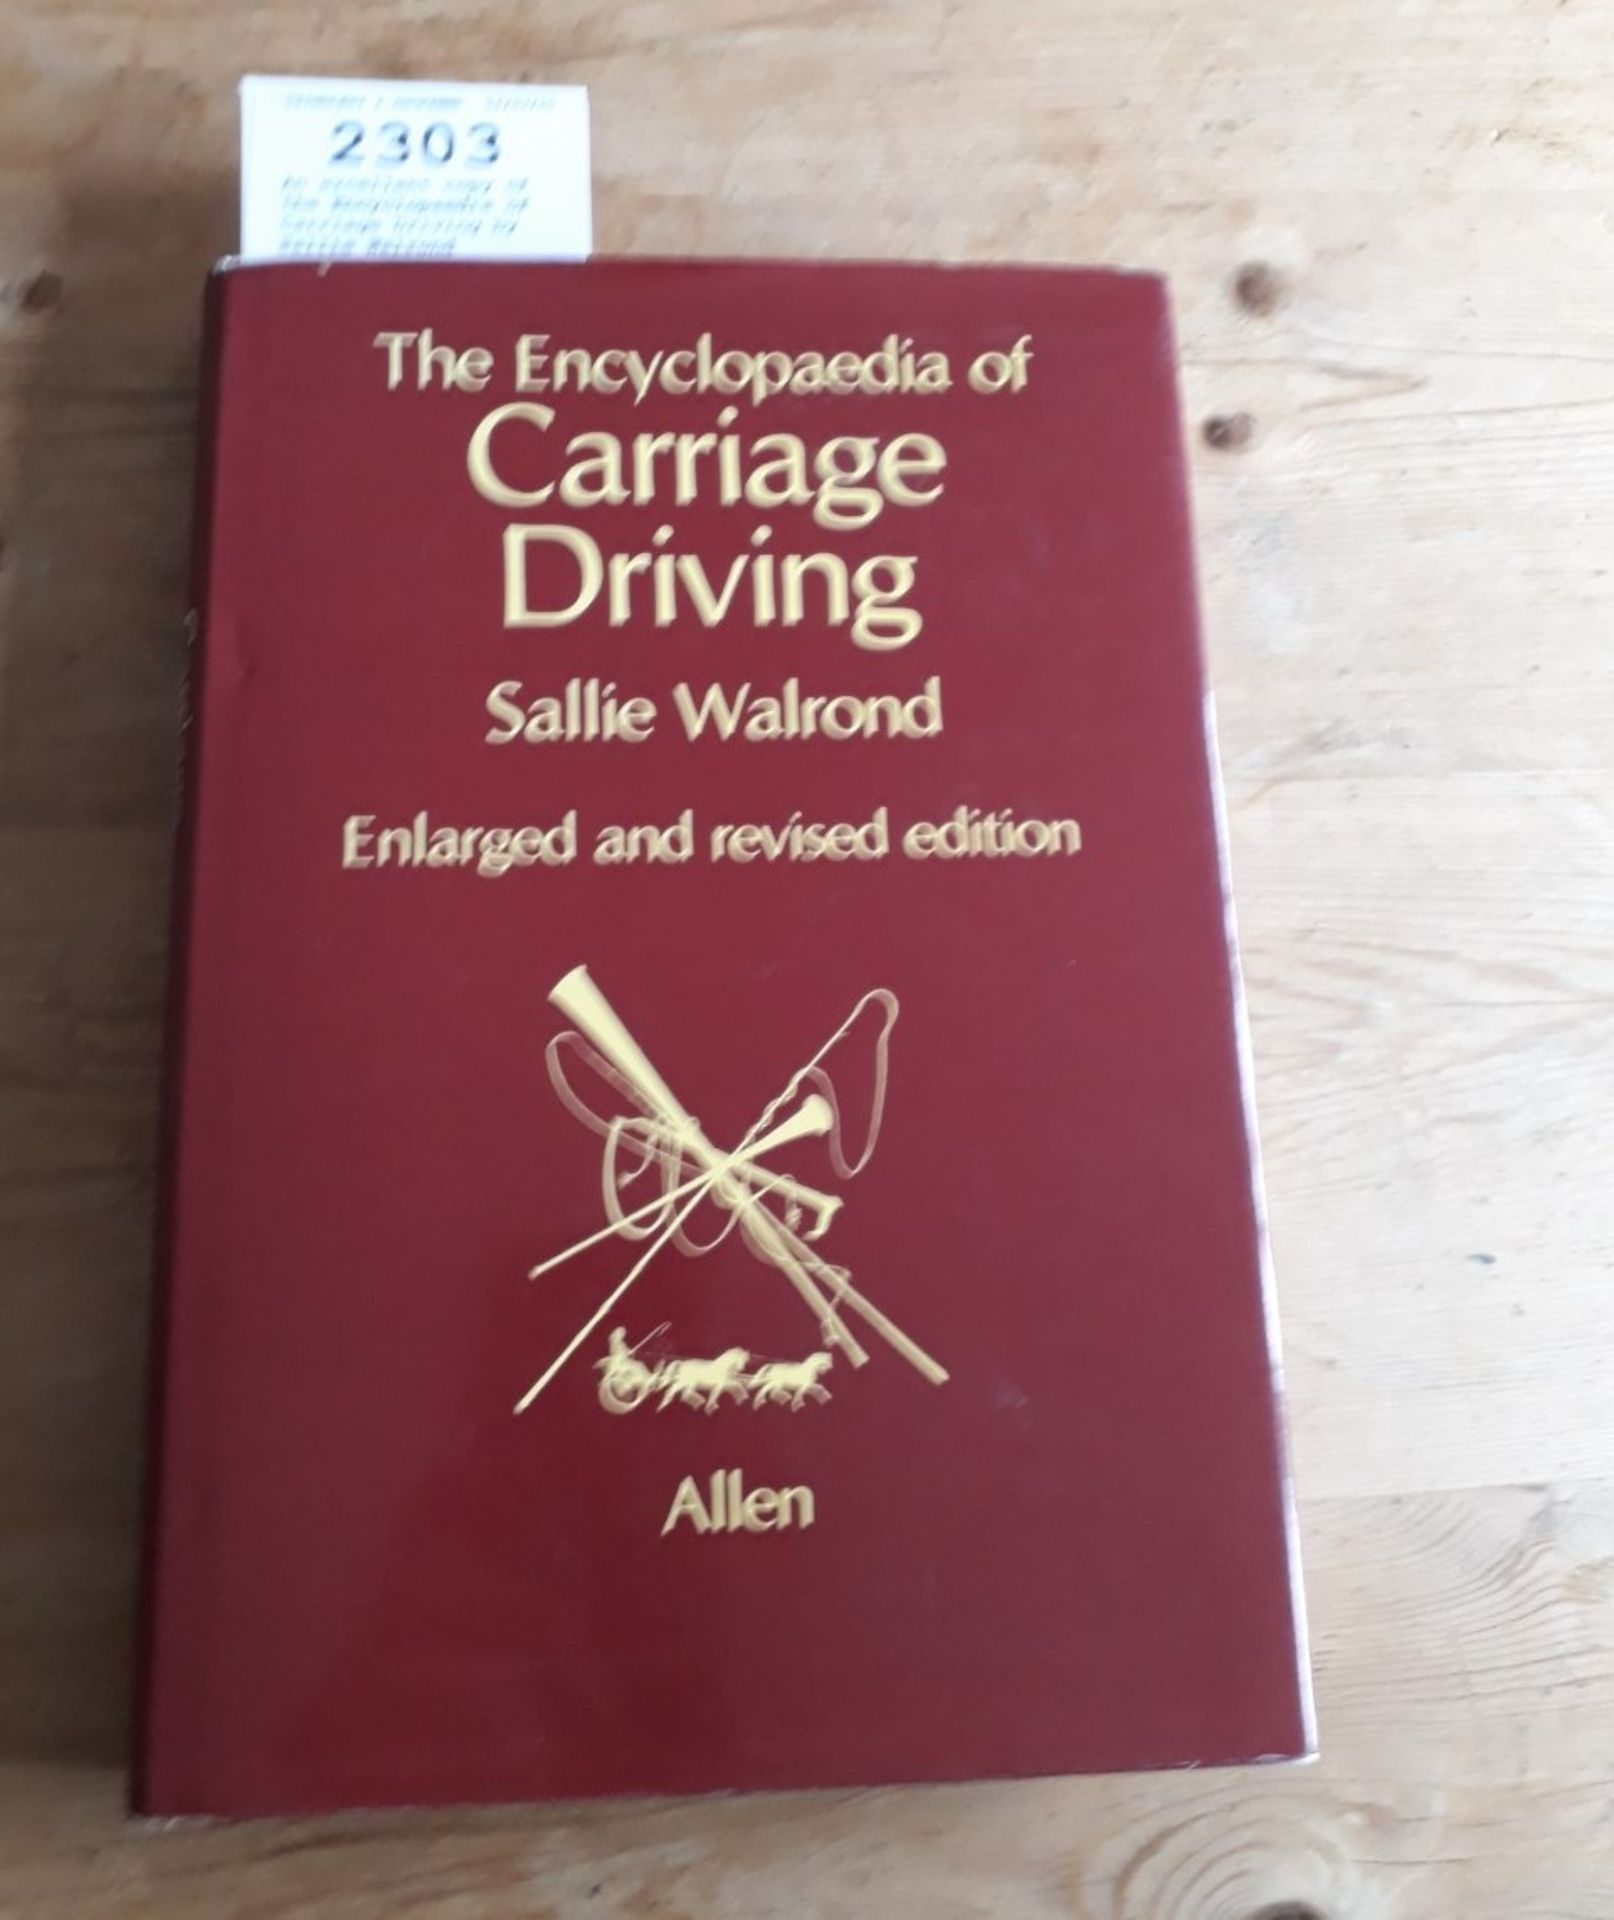 An excellent copy of the Encyclopaedia of Carriage Driving by Sallie Walrond